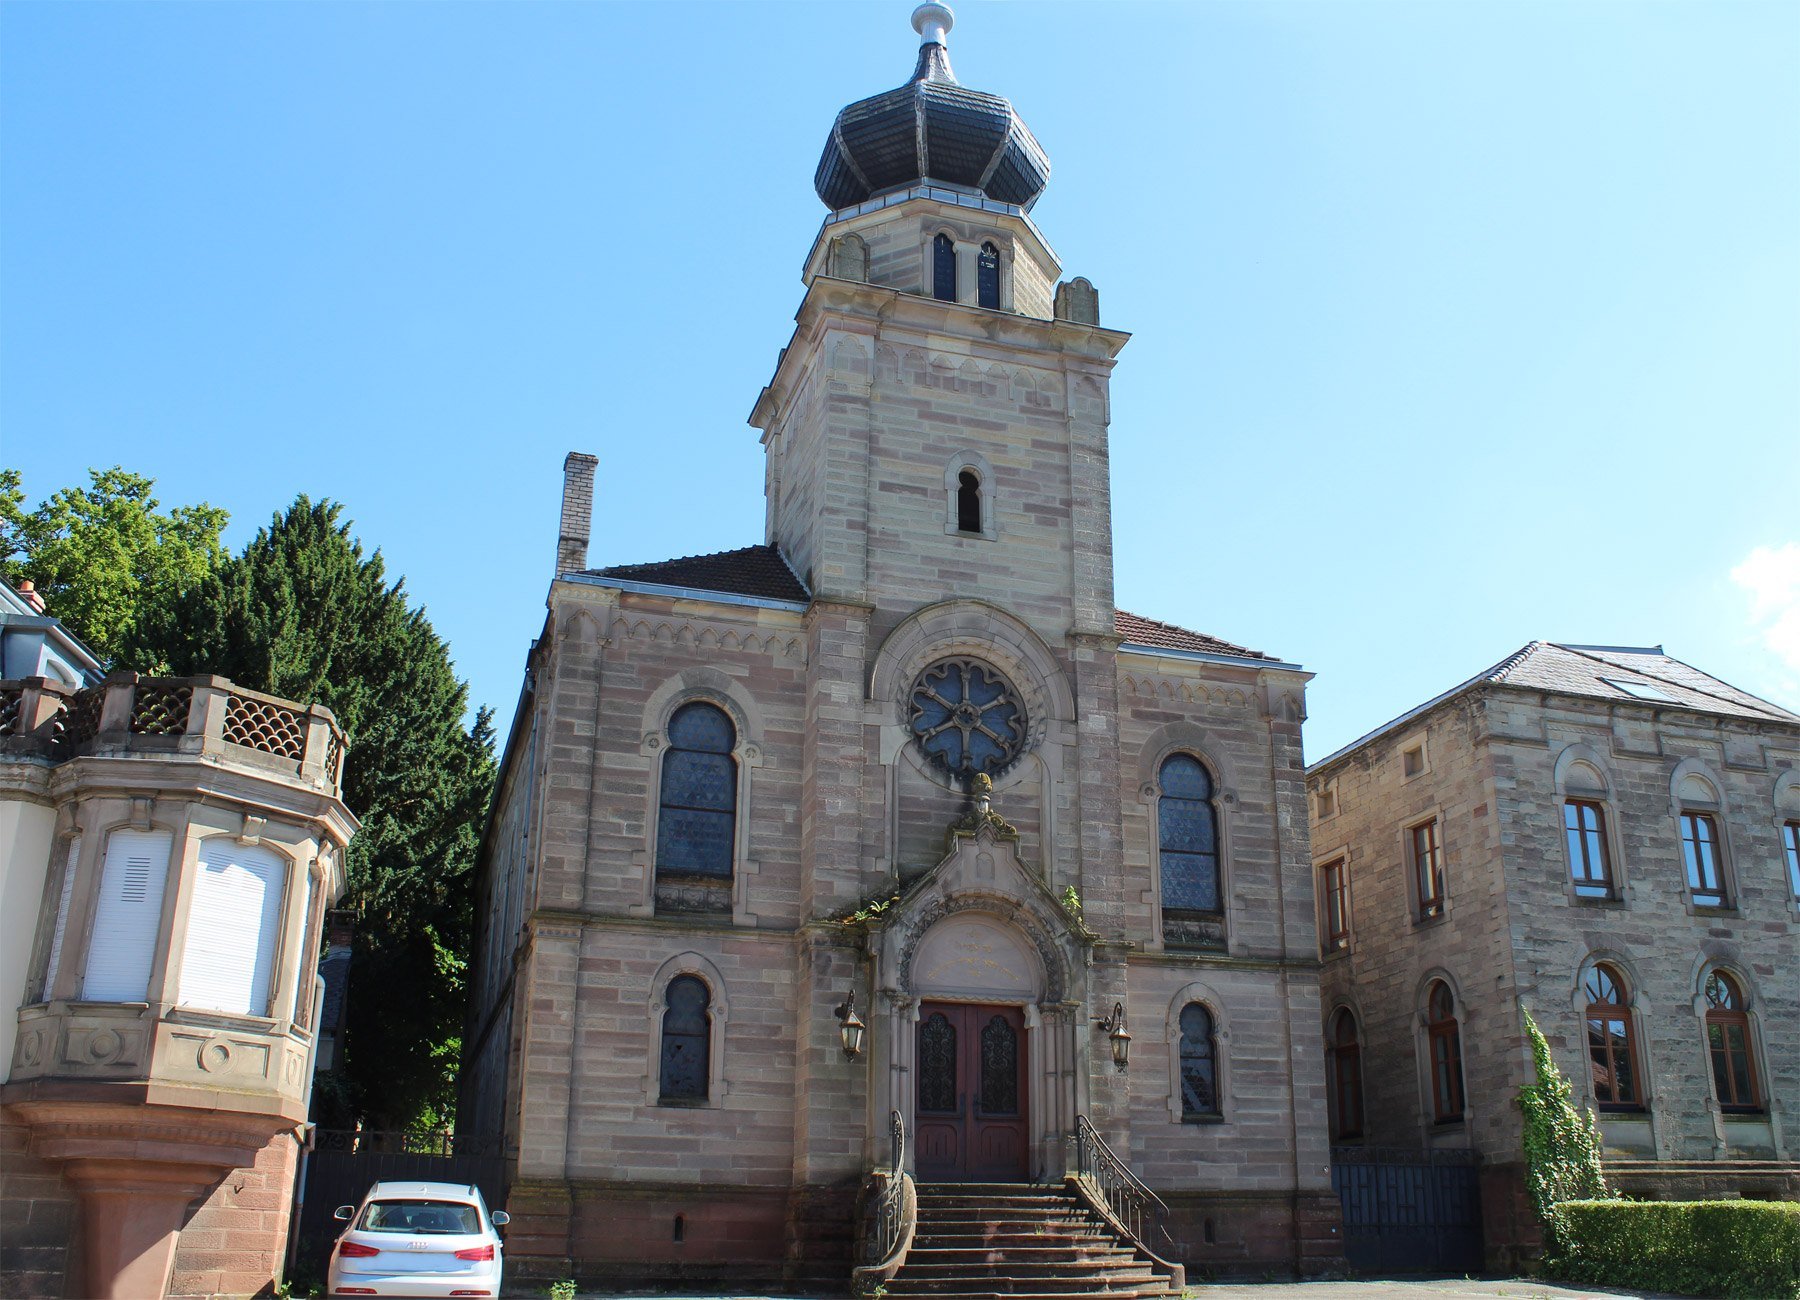 The Synagogue of Saverne